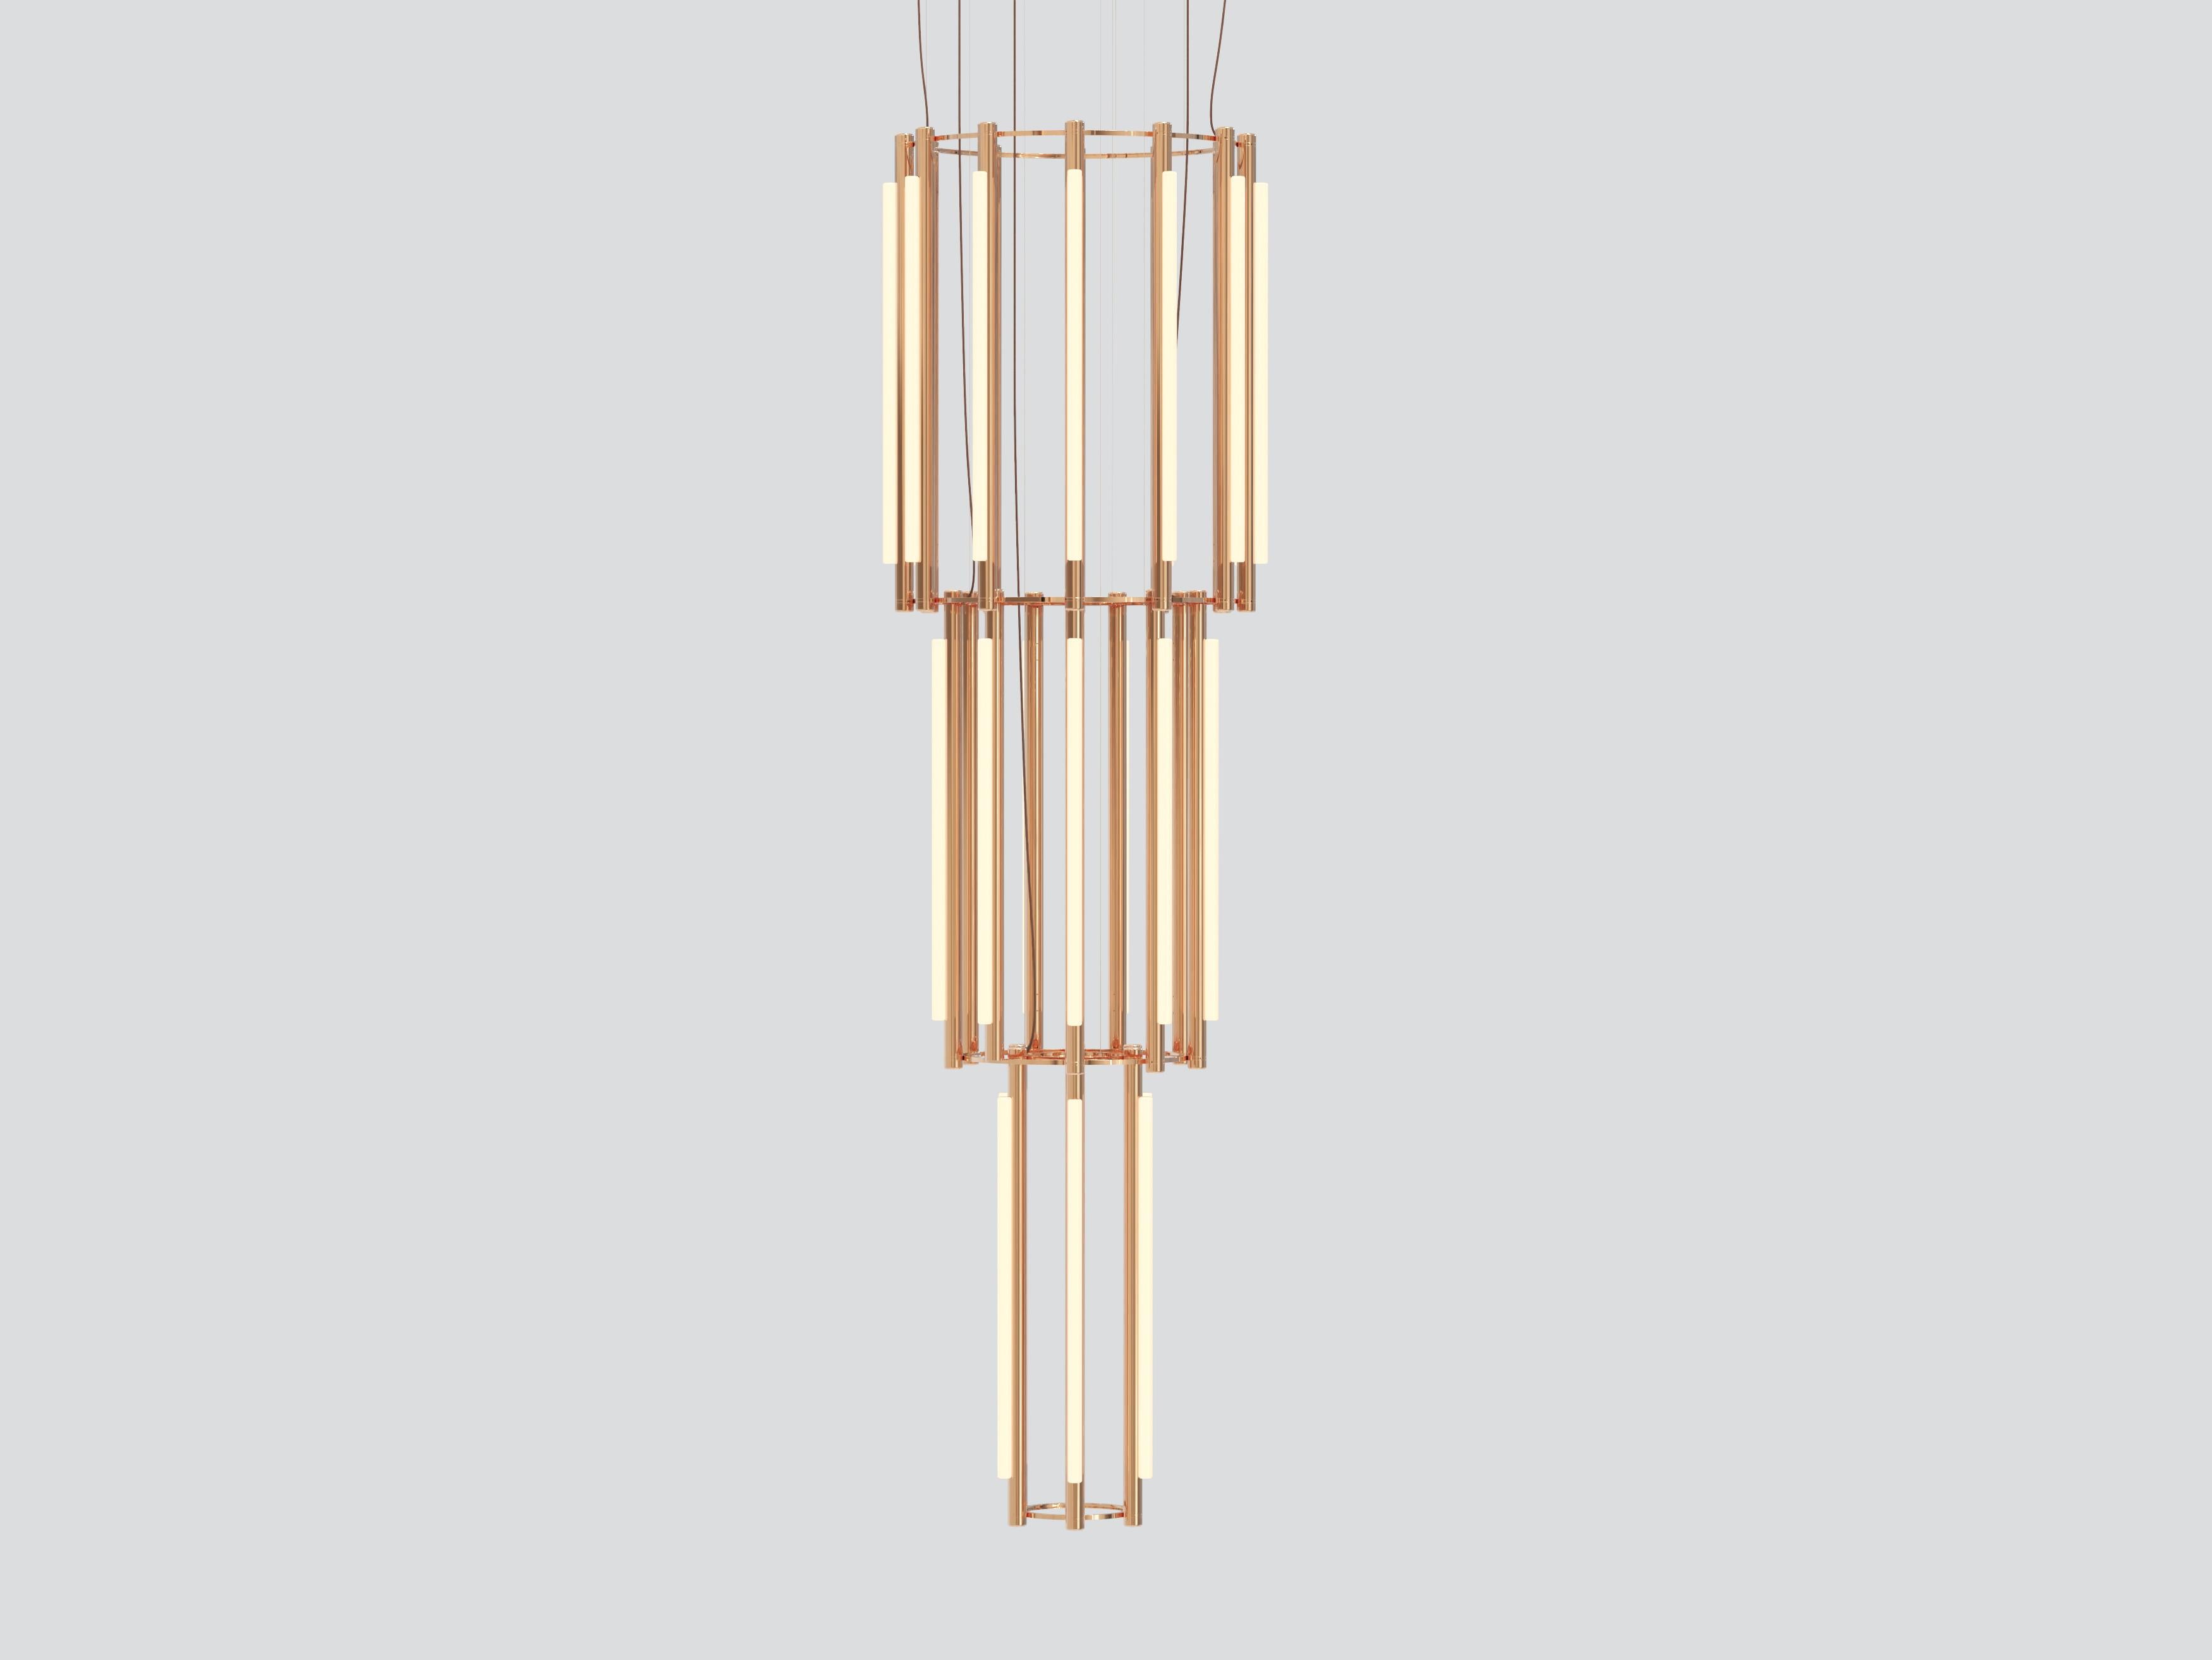 Pipeline chandelier 12 – pendant
by Caine Heintzman.

Materials
– aluminum body
– cast acrylic

Electrical
– 27 x 15W LED
– 47,000 hour Lifetime
– 90+ CRI
– Input Voltage 100–240V + 277V
– Integral 24V DC power supply included
– Dimming